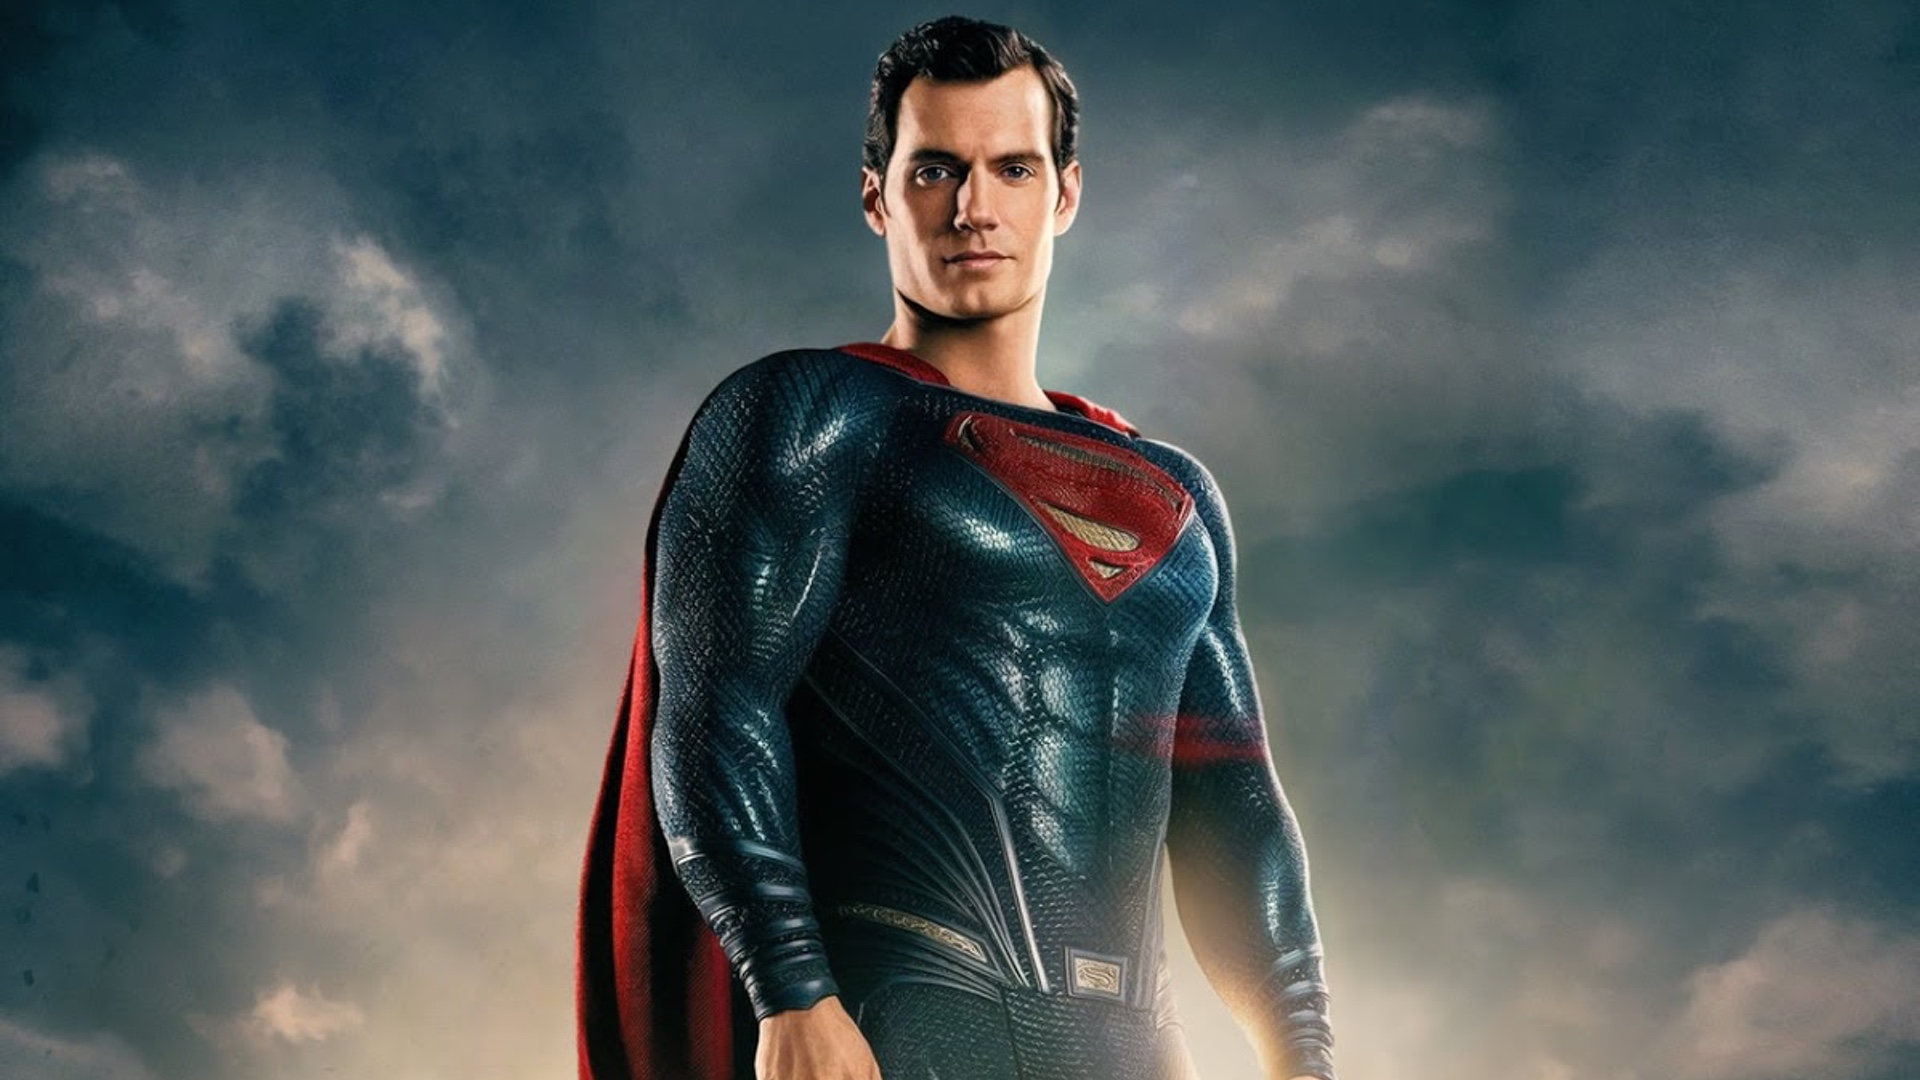 Henry Cavill Says A Responsibilty Comes With Playing Superman, And Hopes To Play The Character Again In The Coming Years